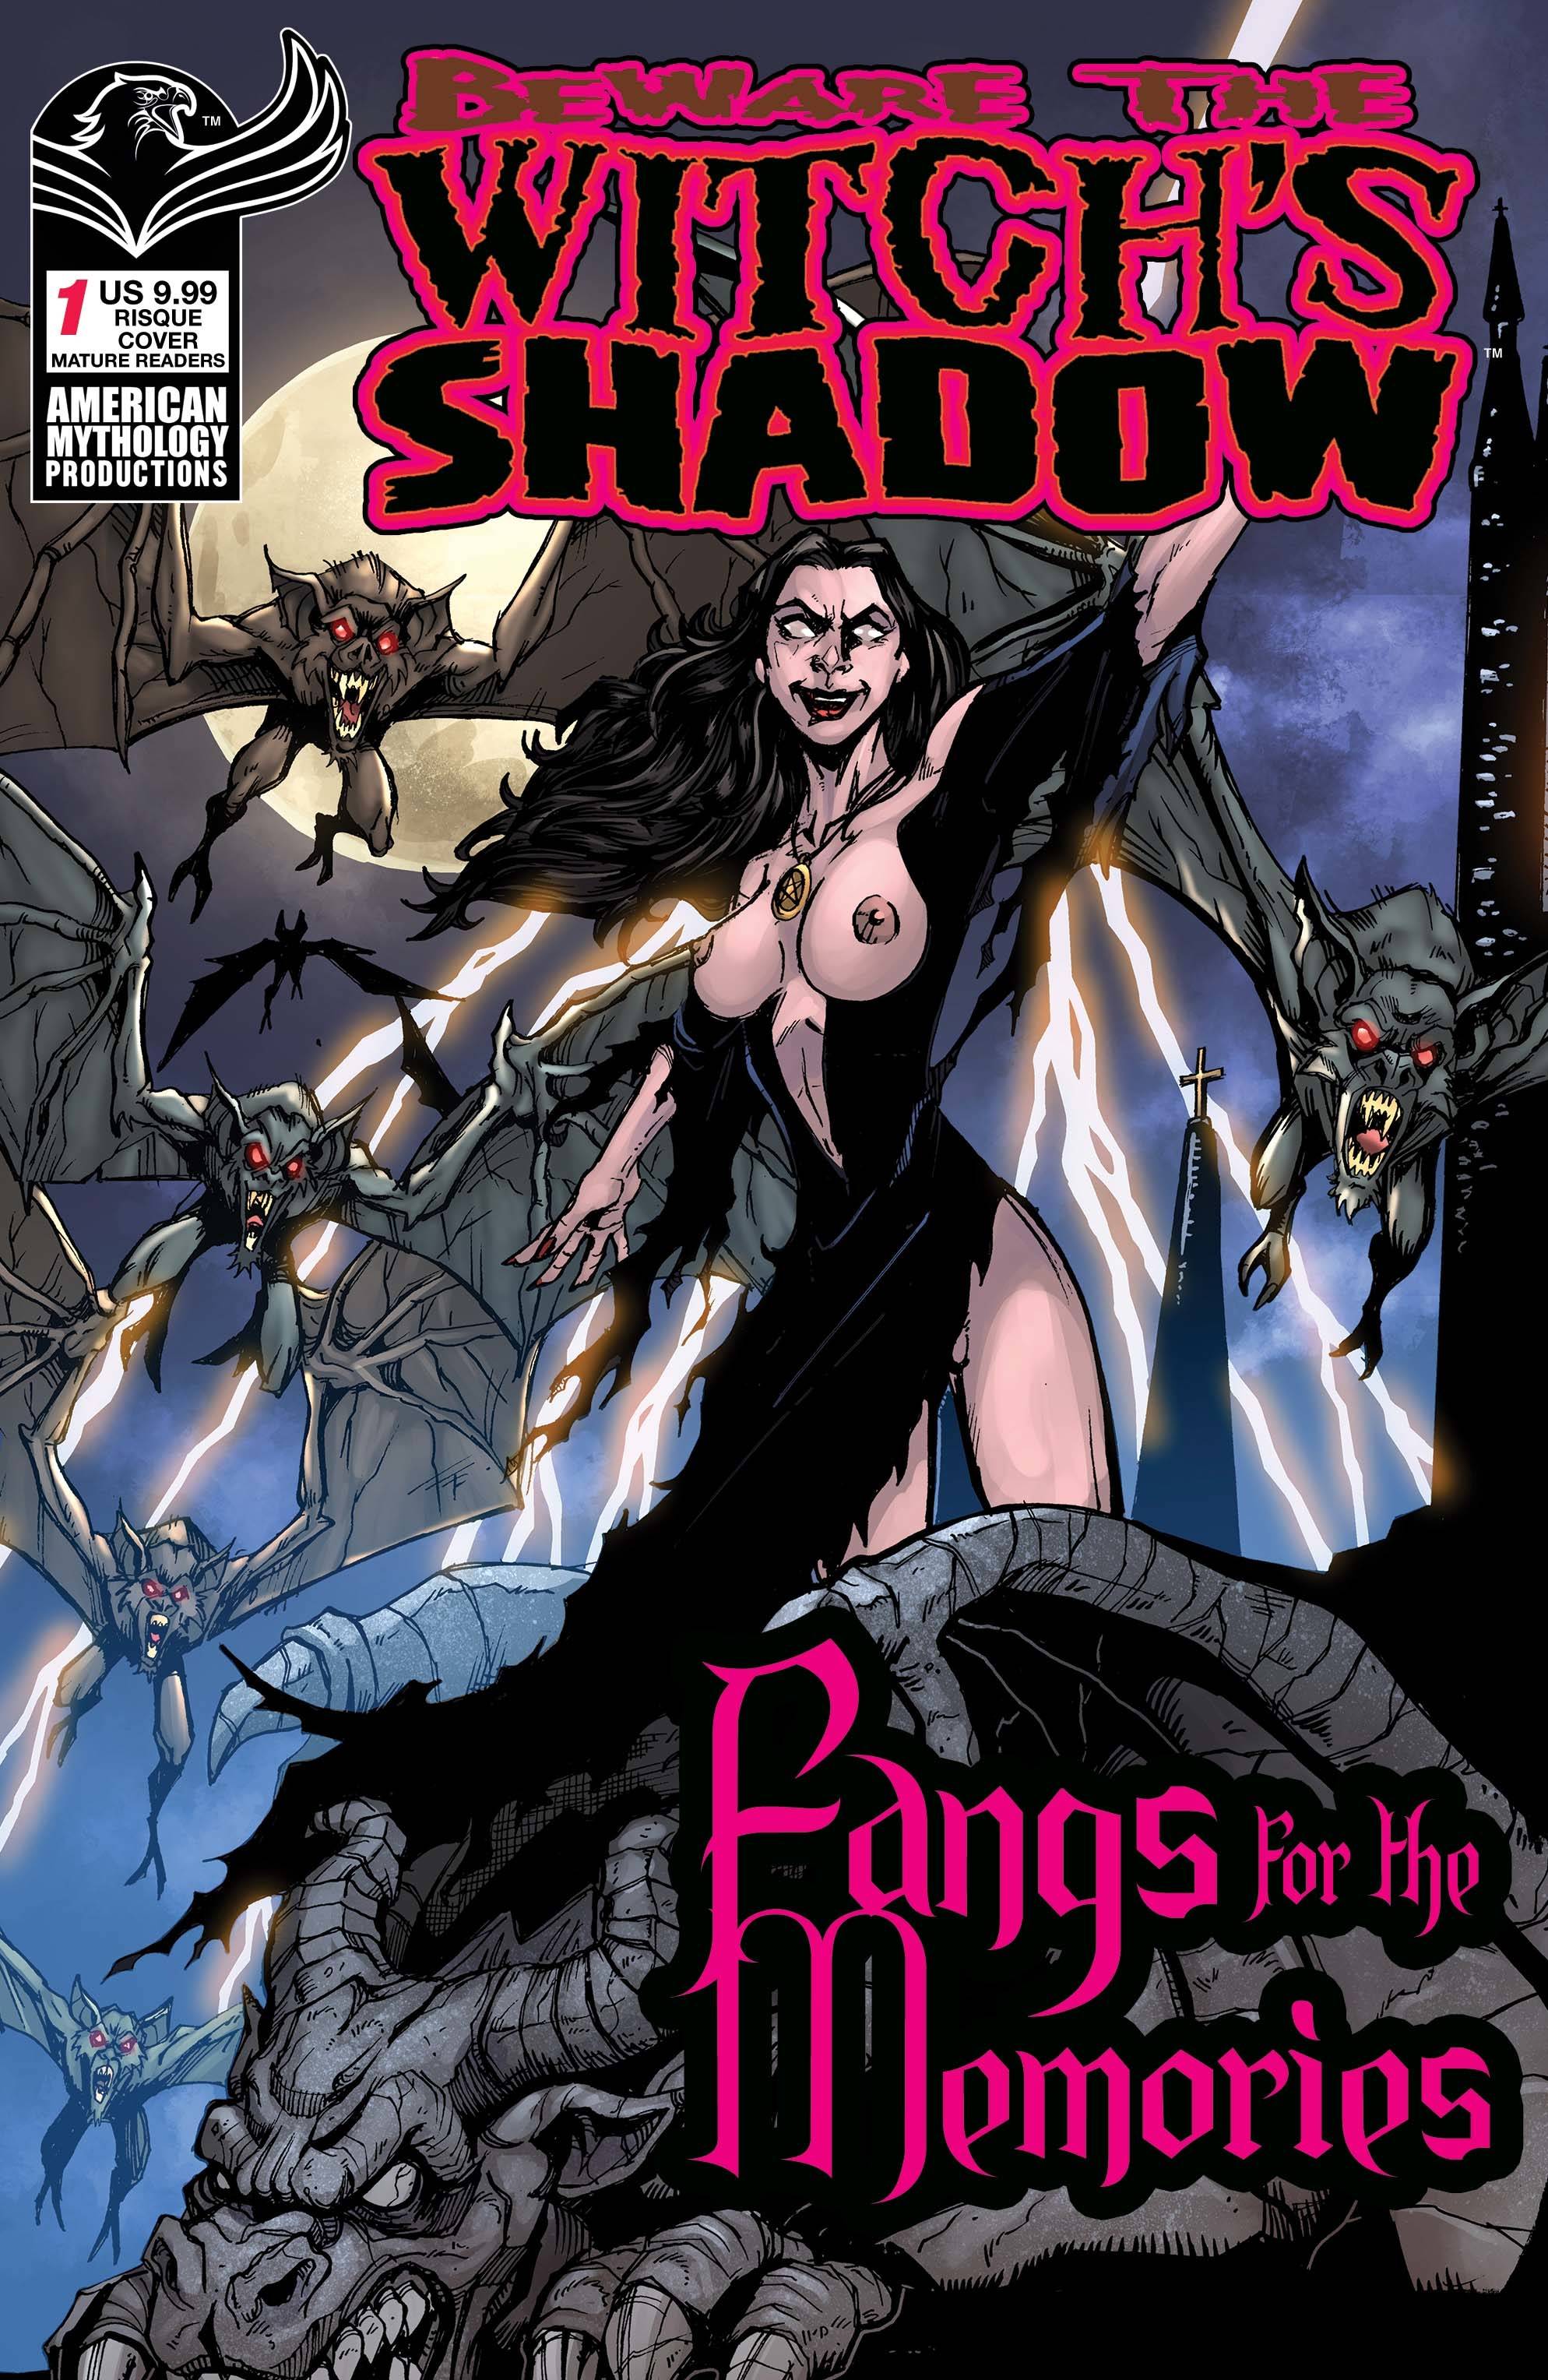 BEWARE WITCHES SHADOW FANGS FOR MEMORIES #1 CVR C RISQUE (MR